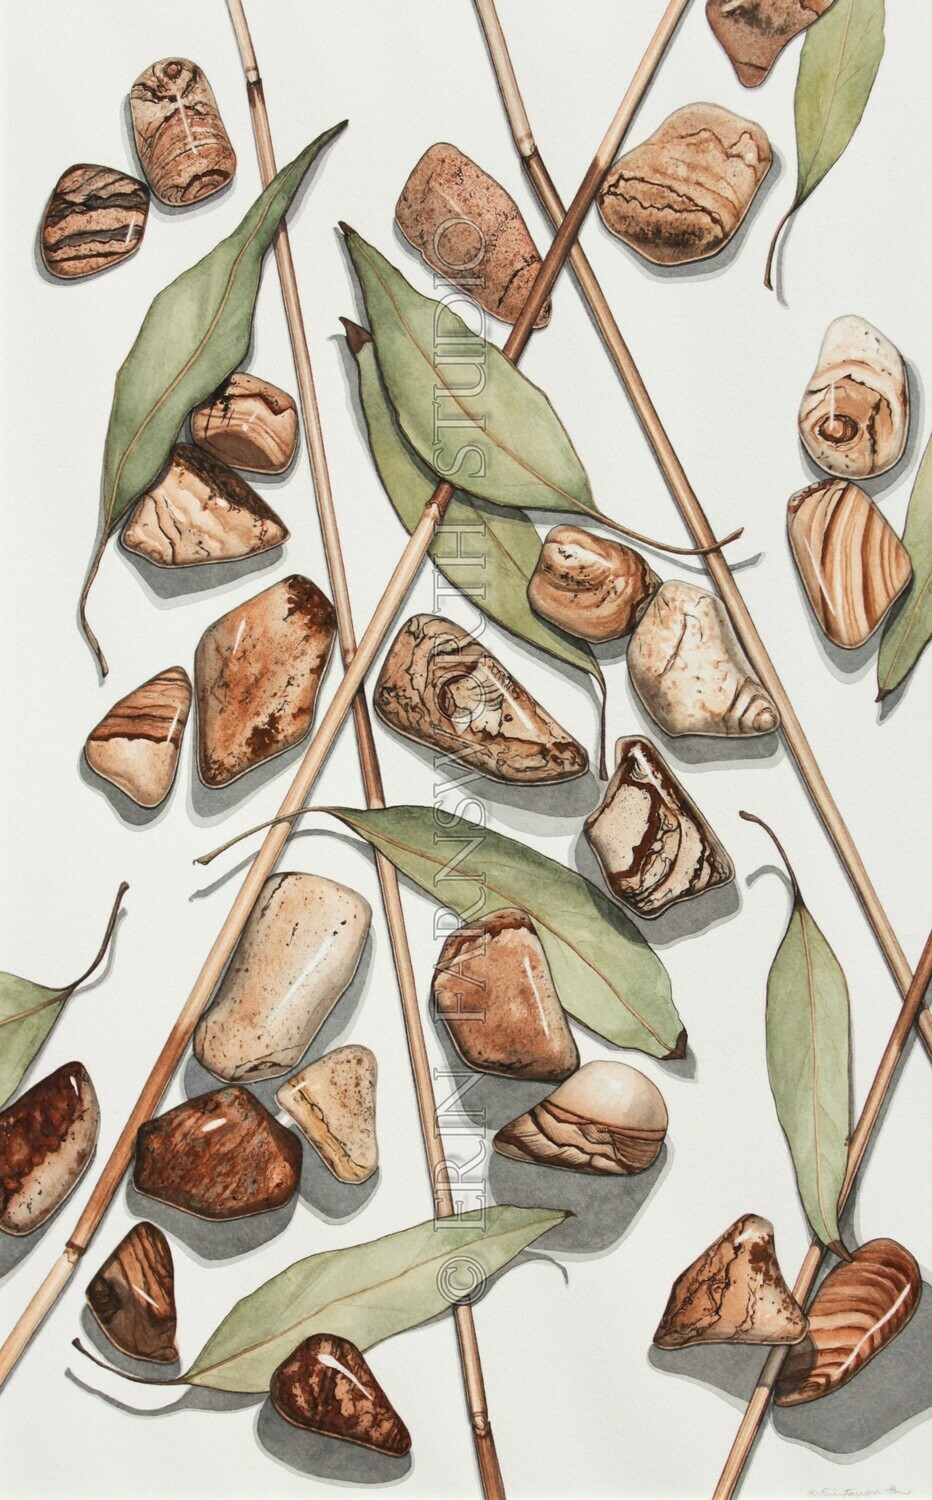 "Reeds, Leaves and Picture Jasper" 11x17 limited edition print